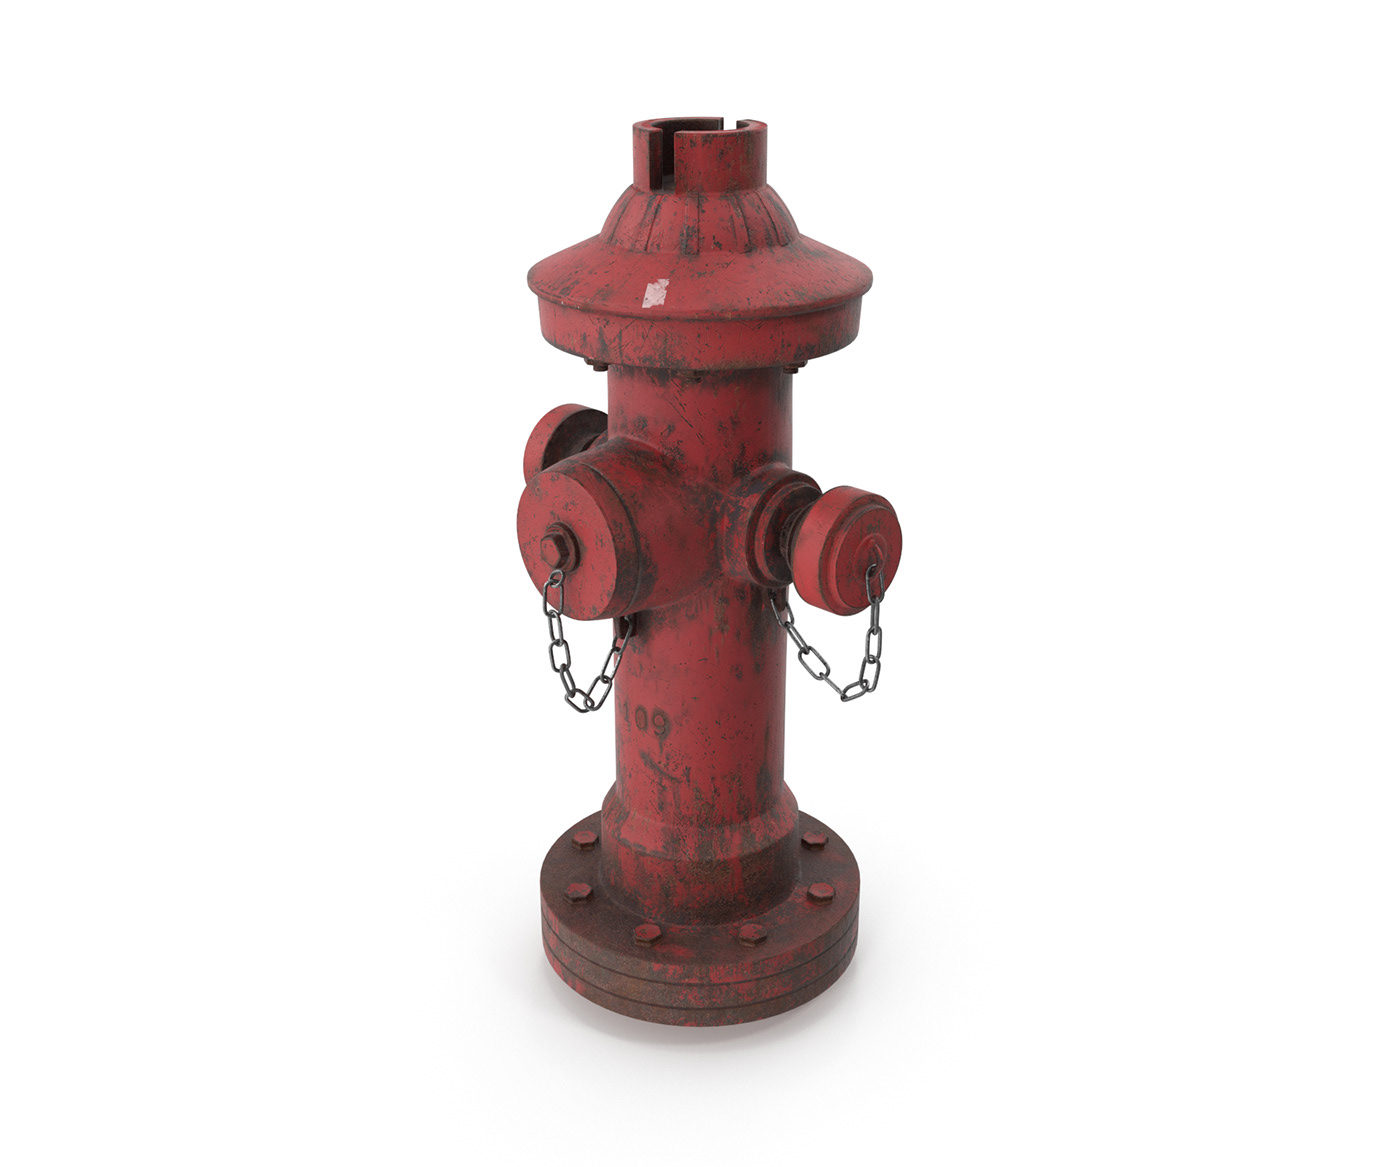 3D 3d modeling 3ds max Fire hydrant game ready fre game hydrant model ready Render